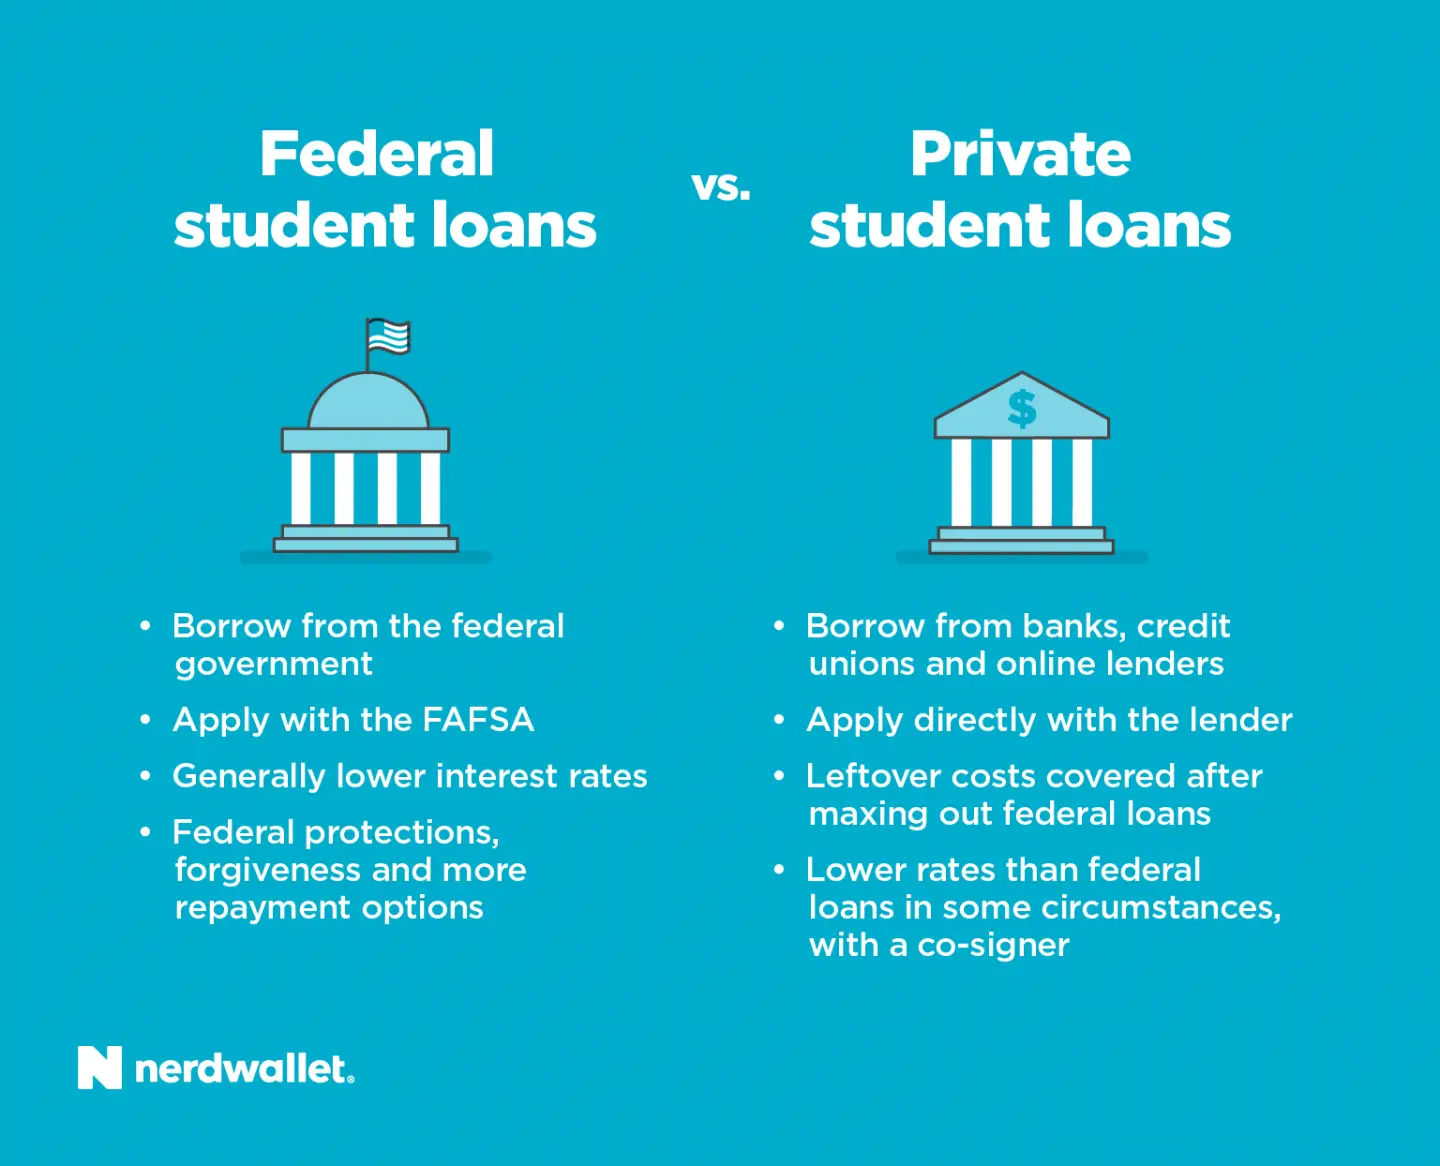 Federal student loans. FEDERAL STUDENT LOANS